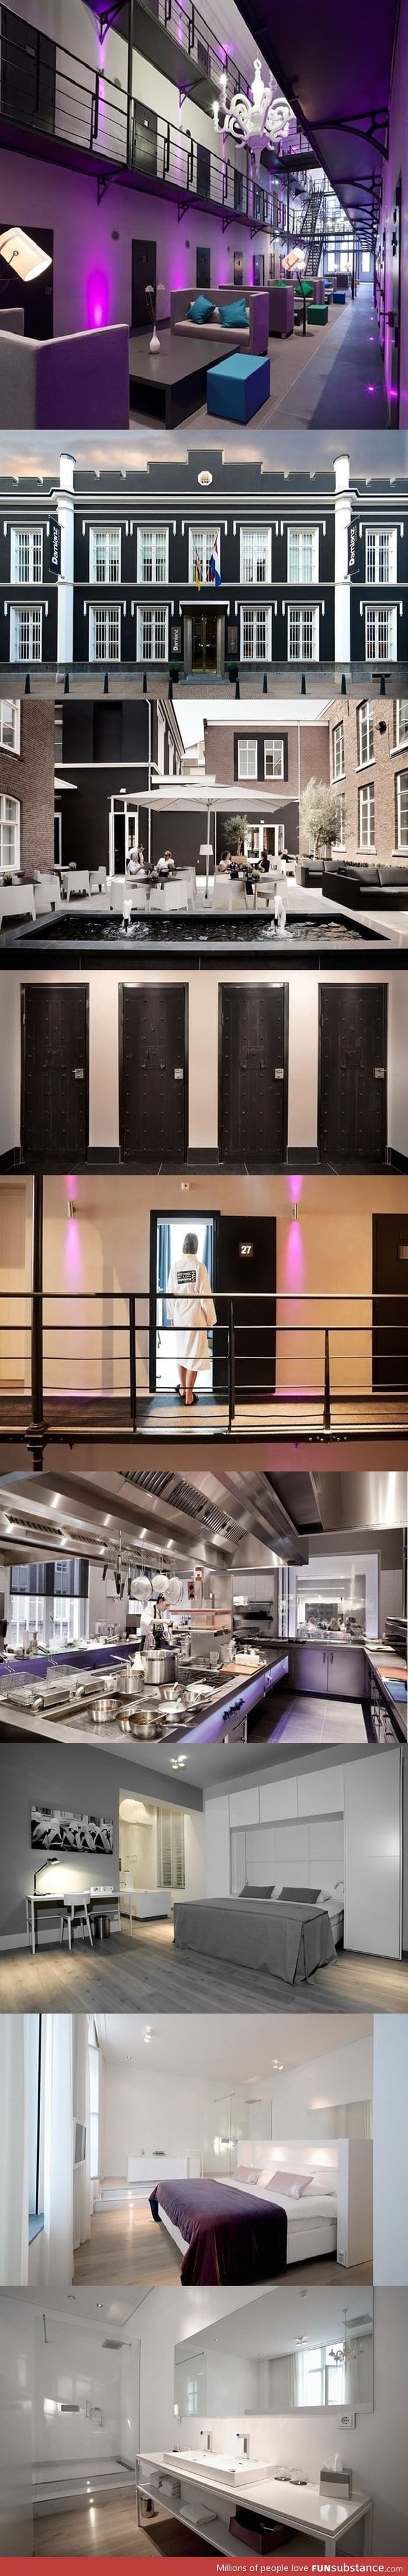 Prison turned into a hotel